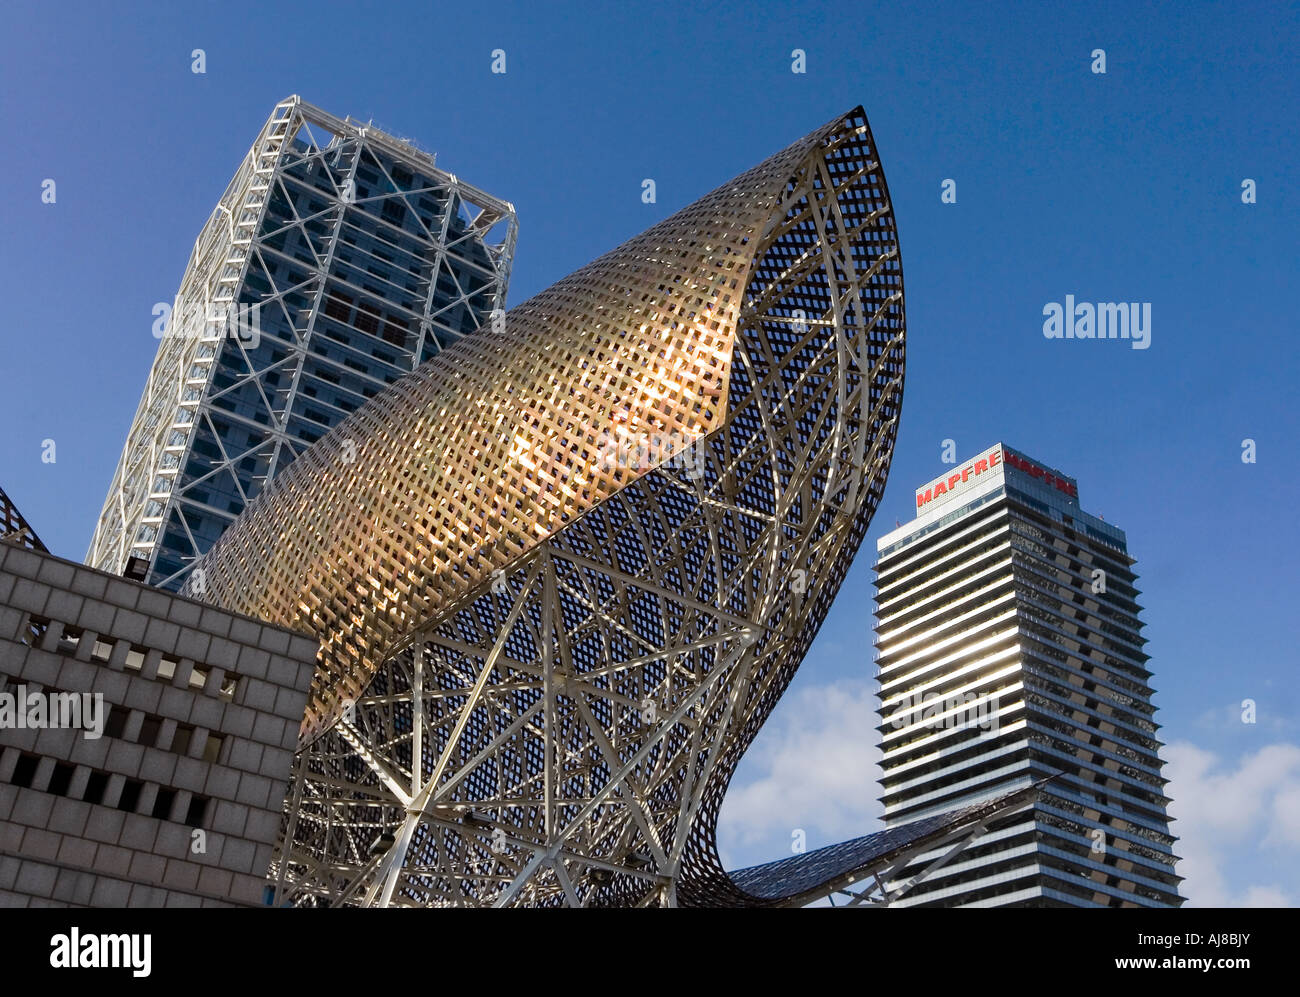 Fish Sculpture by Frank Gehry at the Olympic Village, Barcelona, Spain Stock Photo